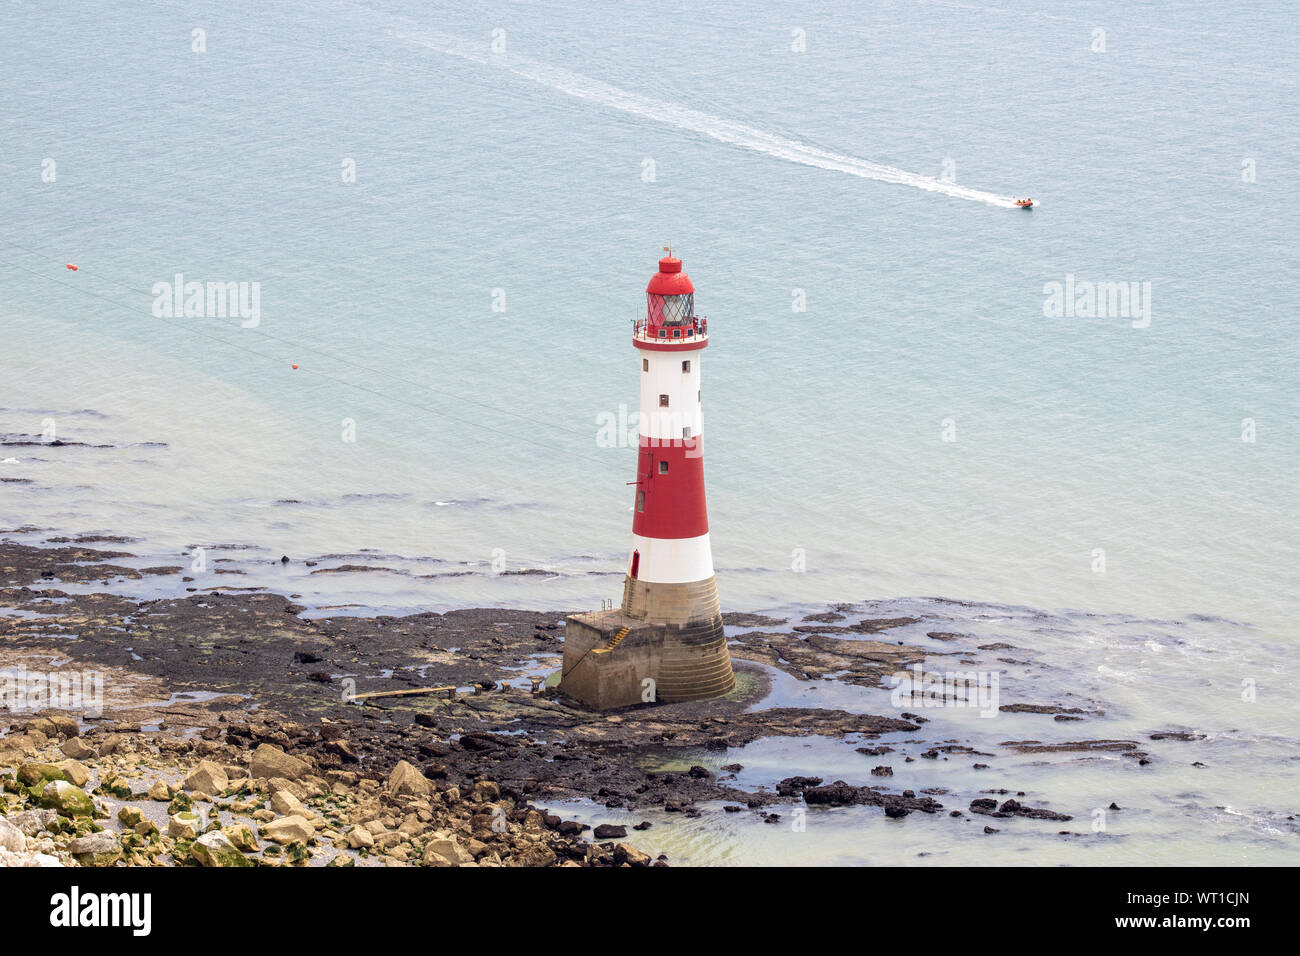 The famous Beachy Head lighthouse located on the rocky beach of Beachy Head the chalk headland cliff in East Sussex showing a typical British light ho Stock Photo